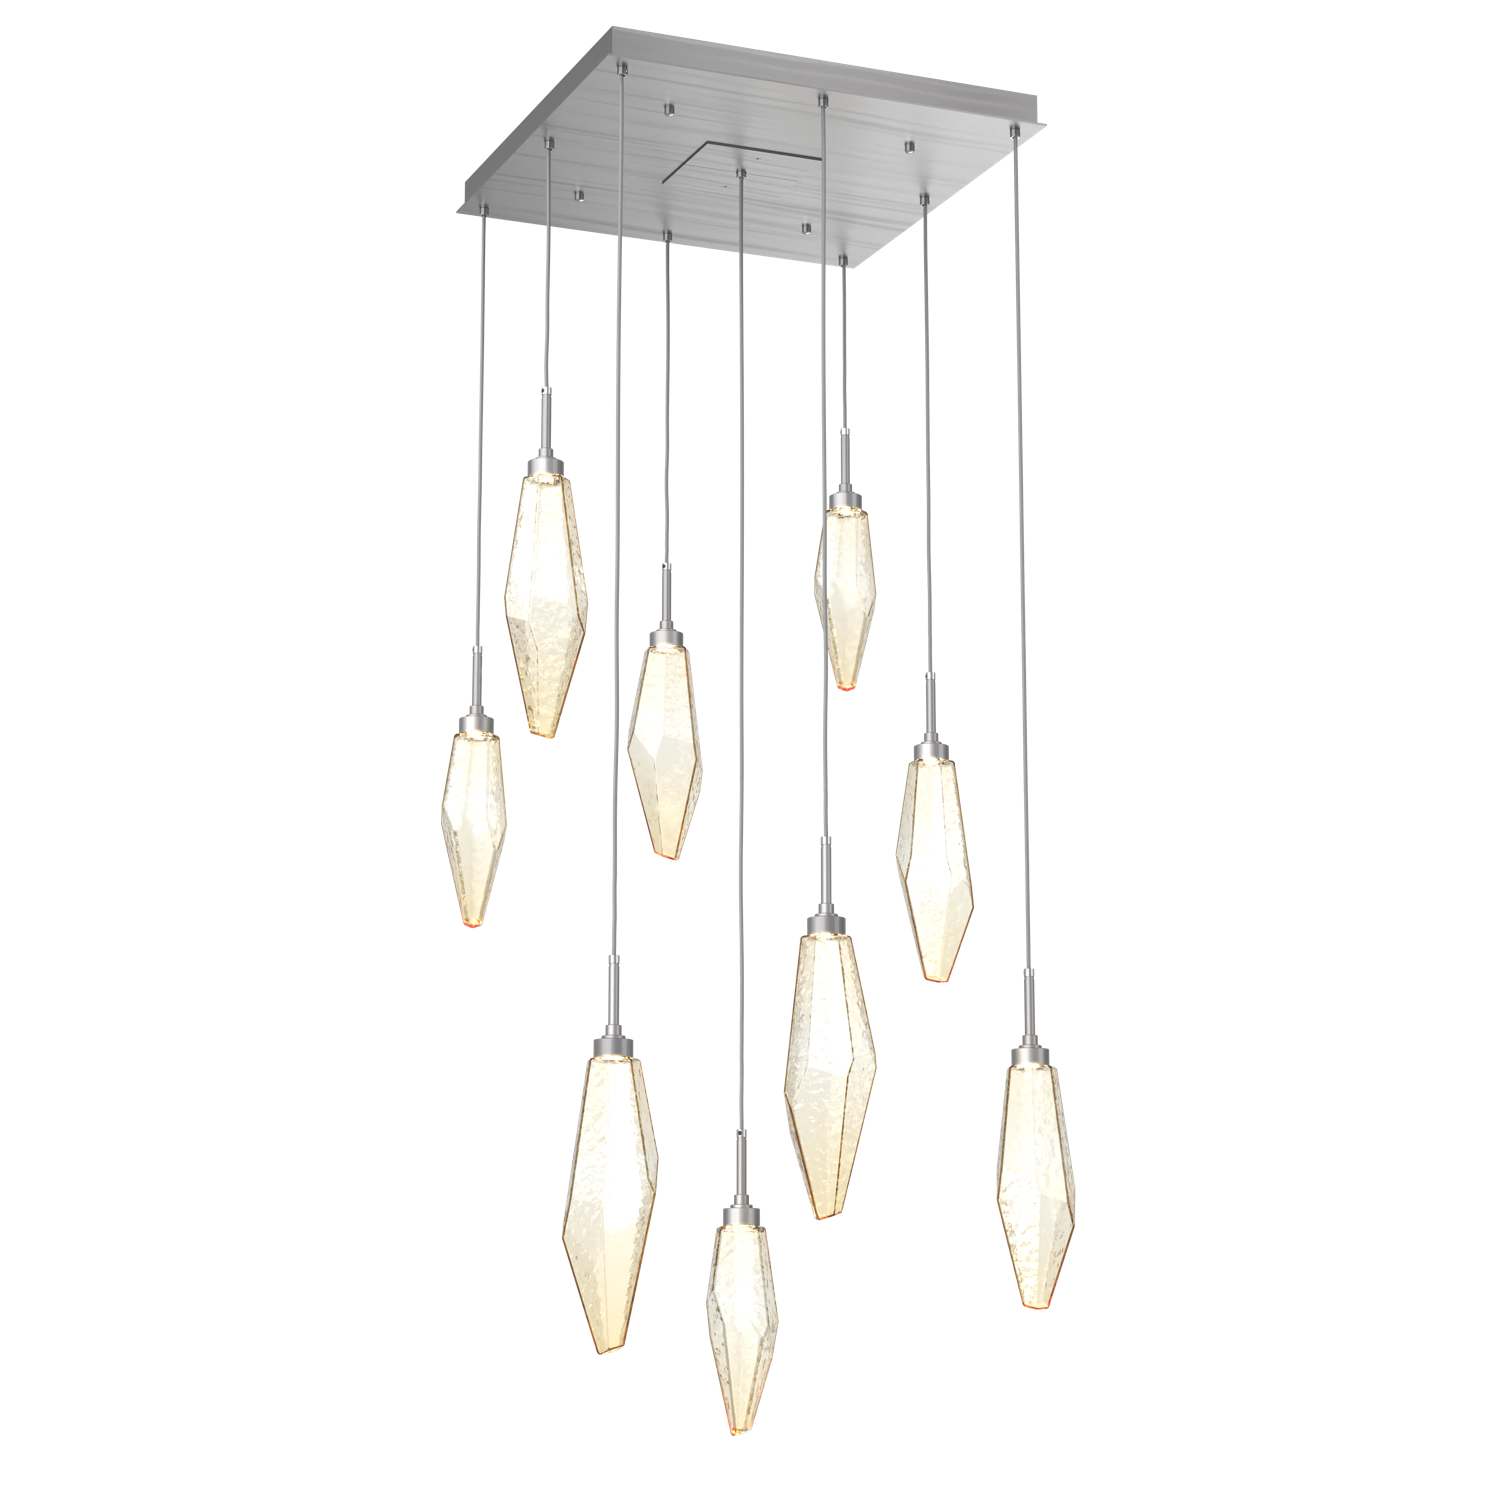 CHB0050-09-SN-CA-Hammerton-Studio-Rock-Crystal-9-light-square-pendant-chandelier-with-satin-nickel-finish-and-chilled-amber-blown-glass-shades-and-LED-lamping